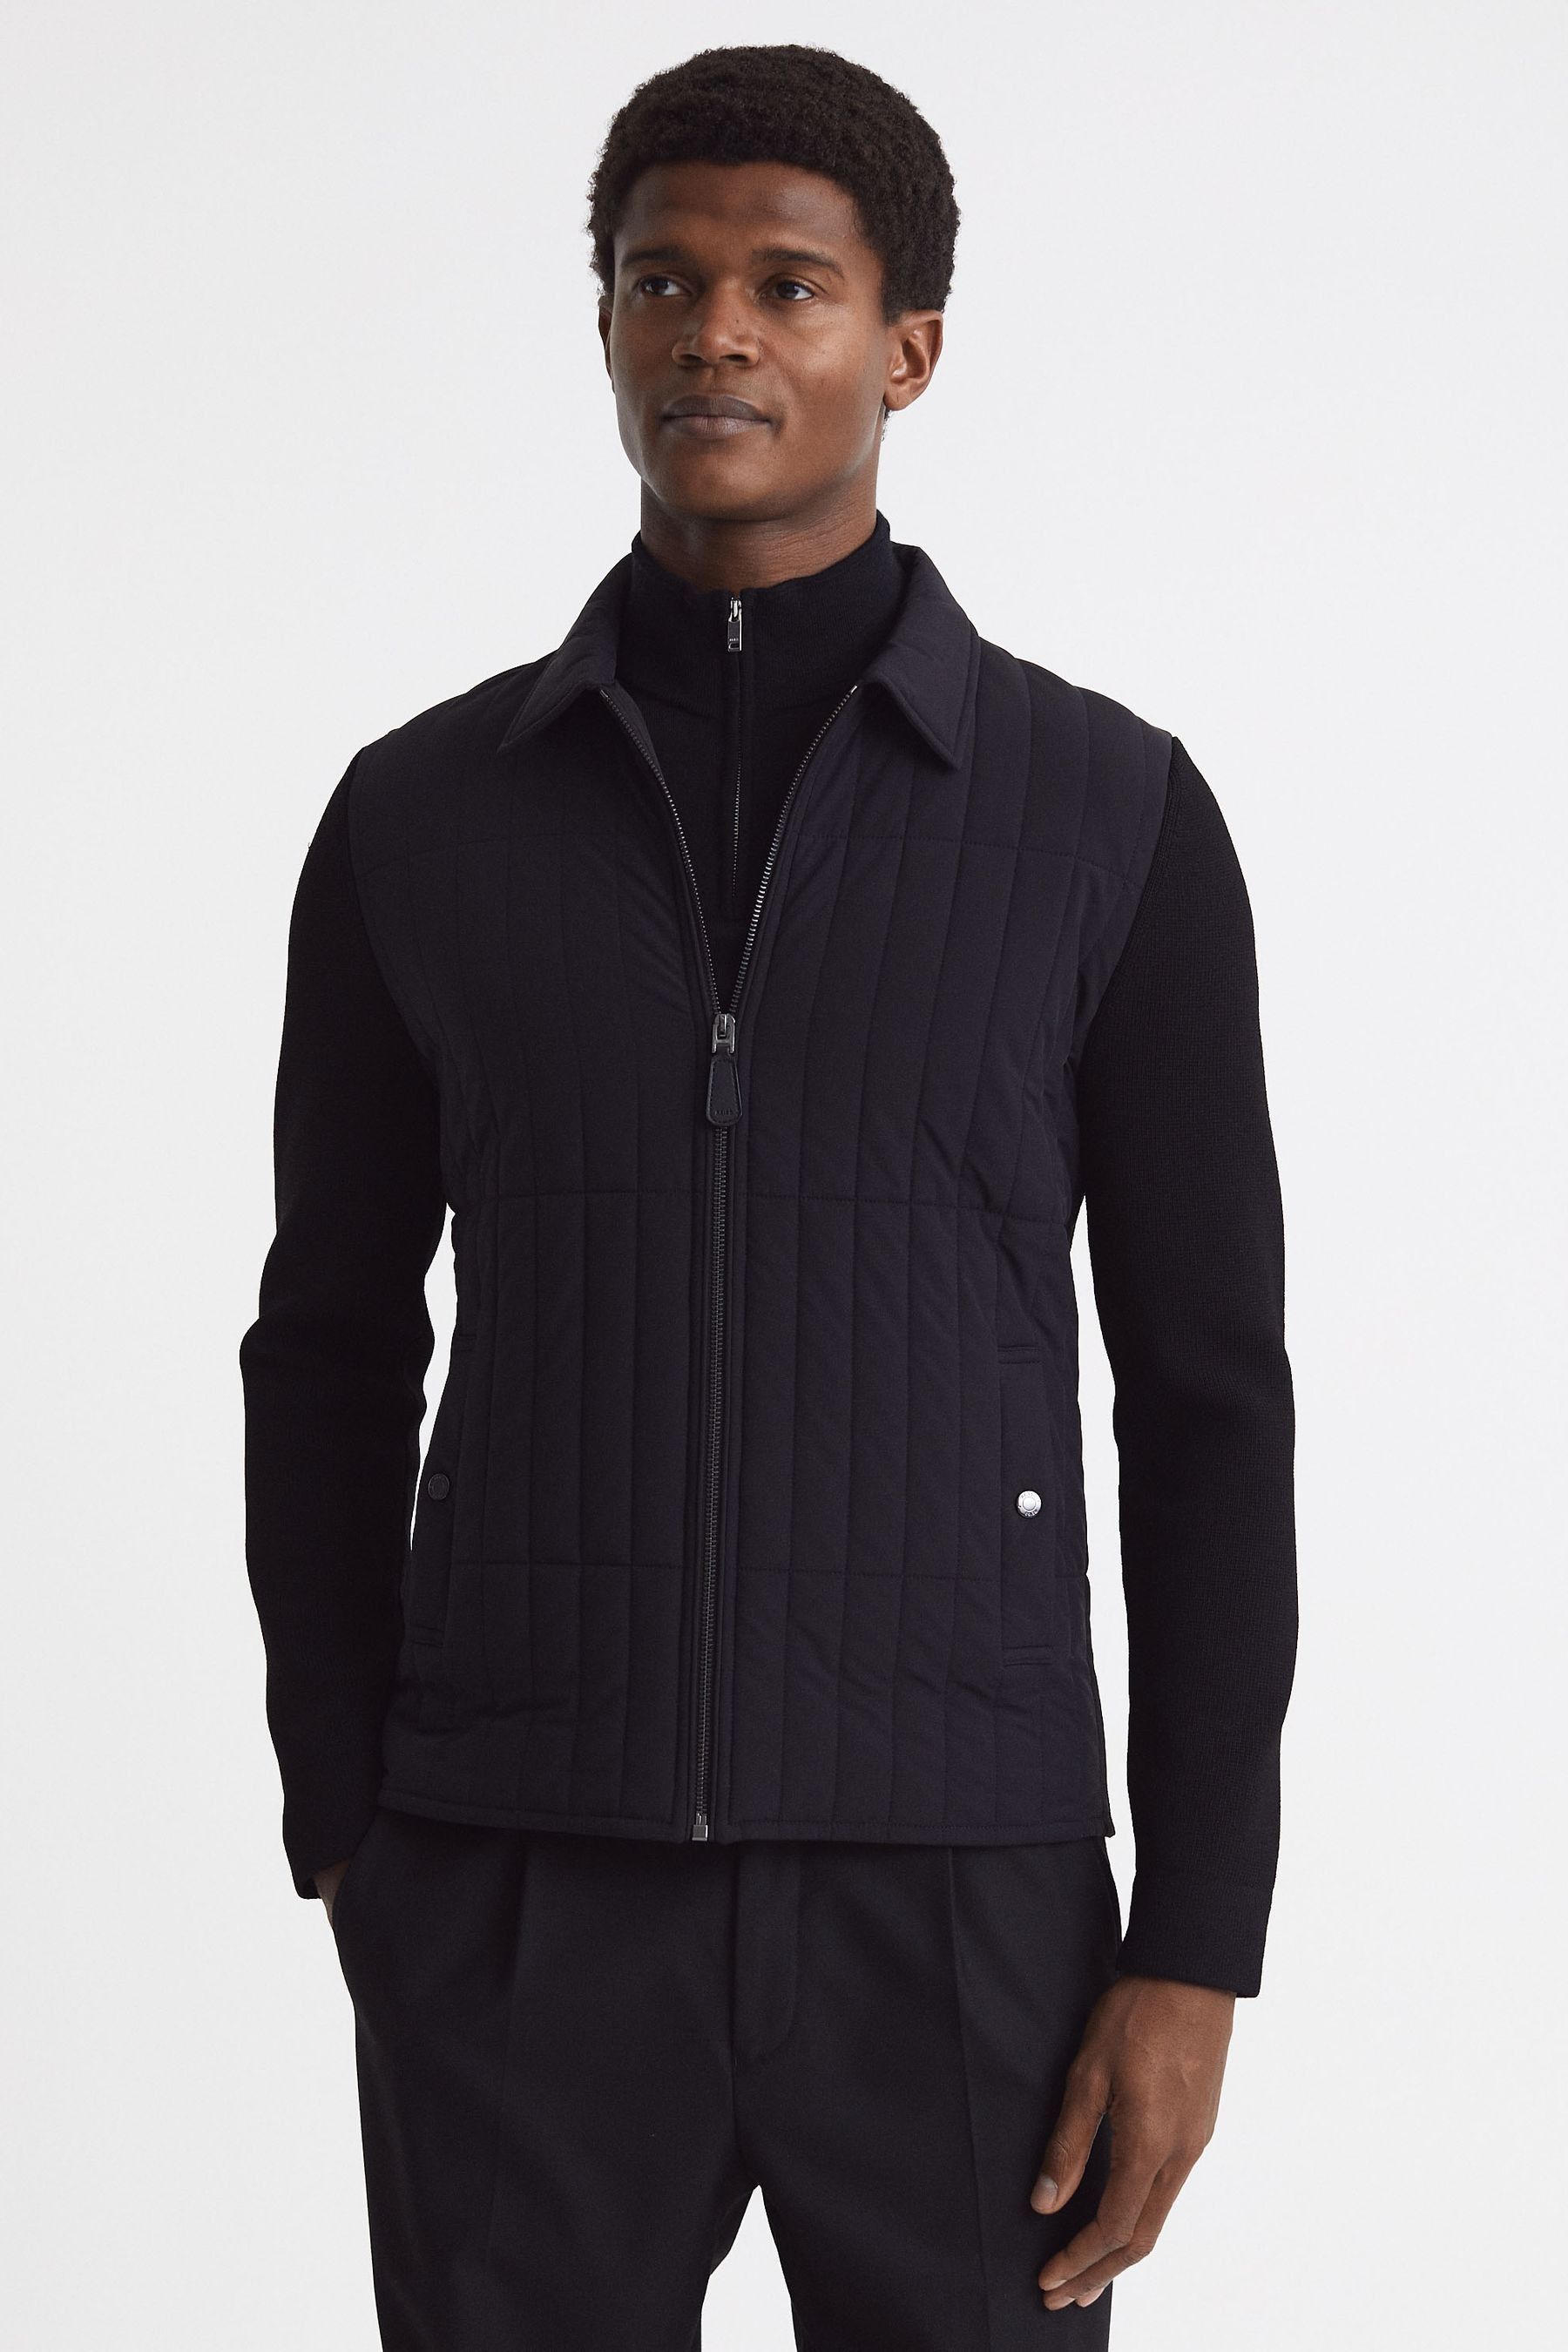 Reiss Tosca - Black Hybrid Knit And Quilt Jacket, M